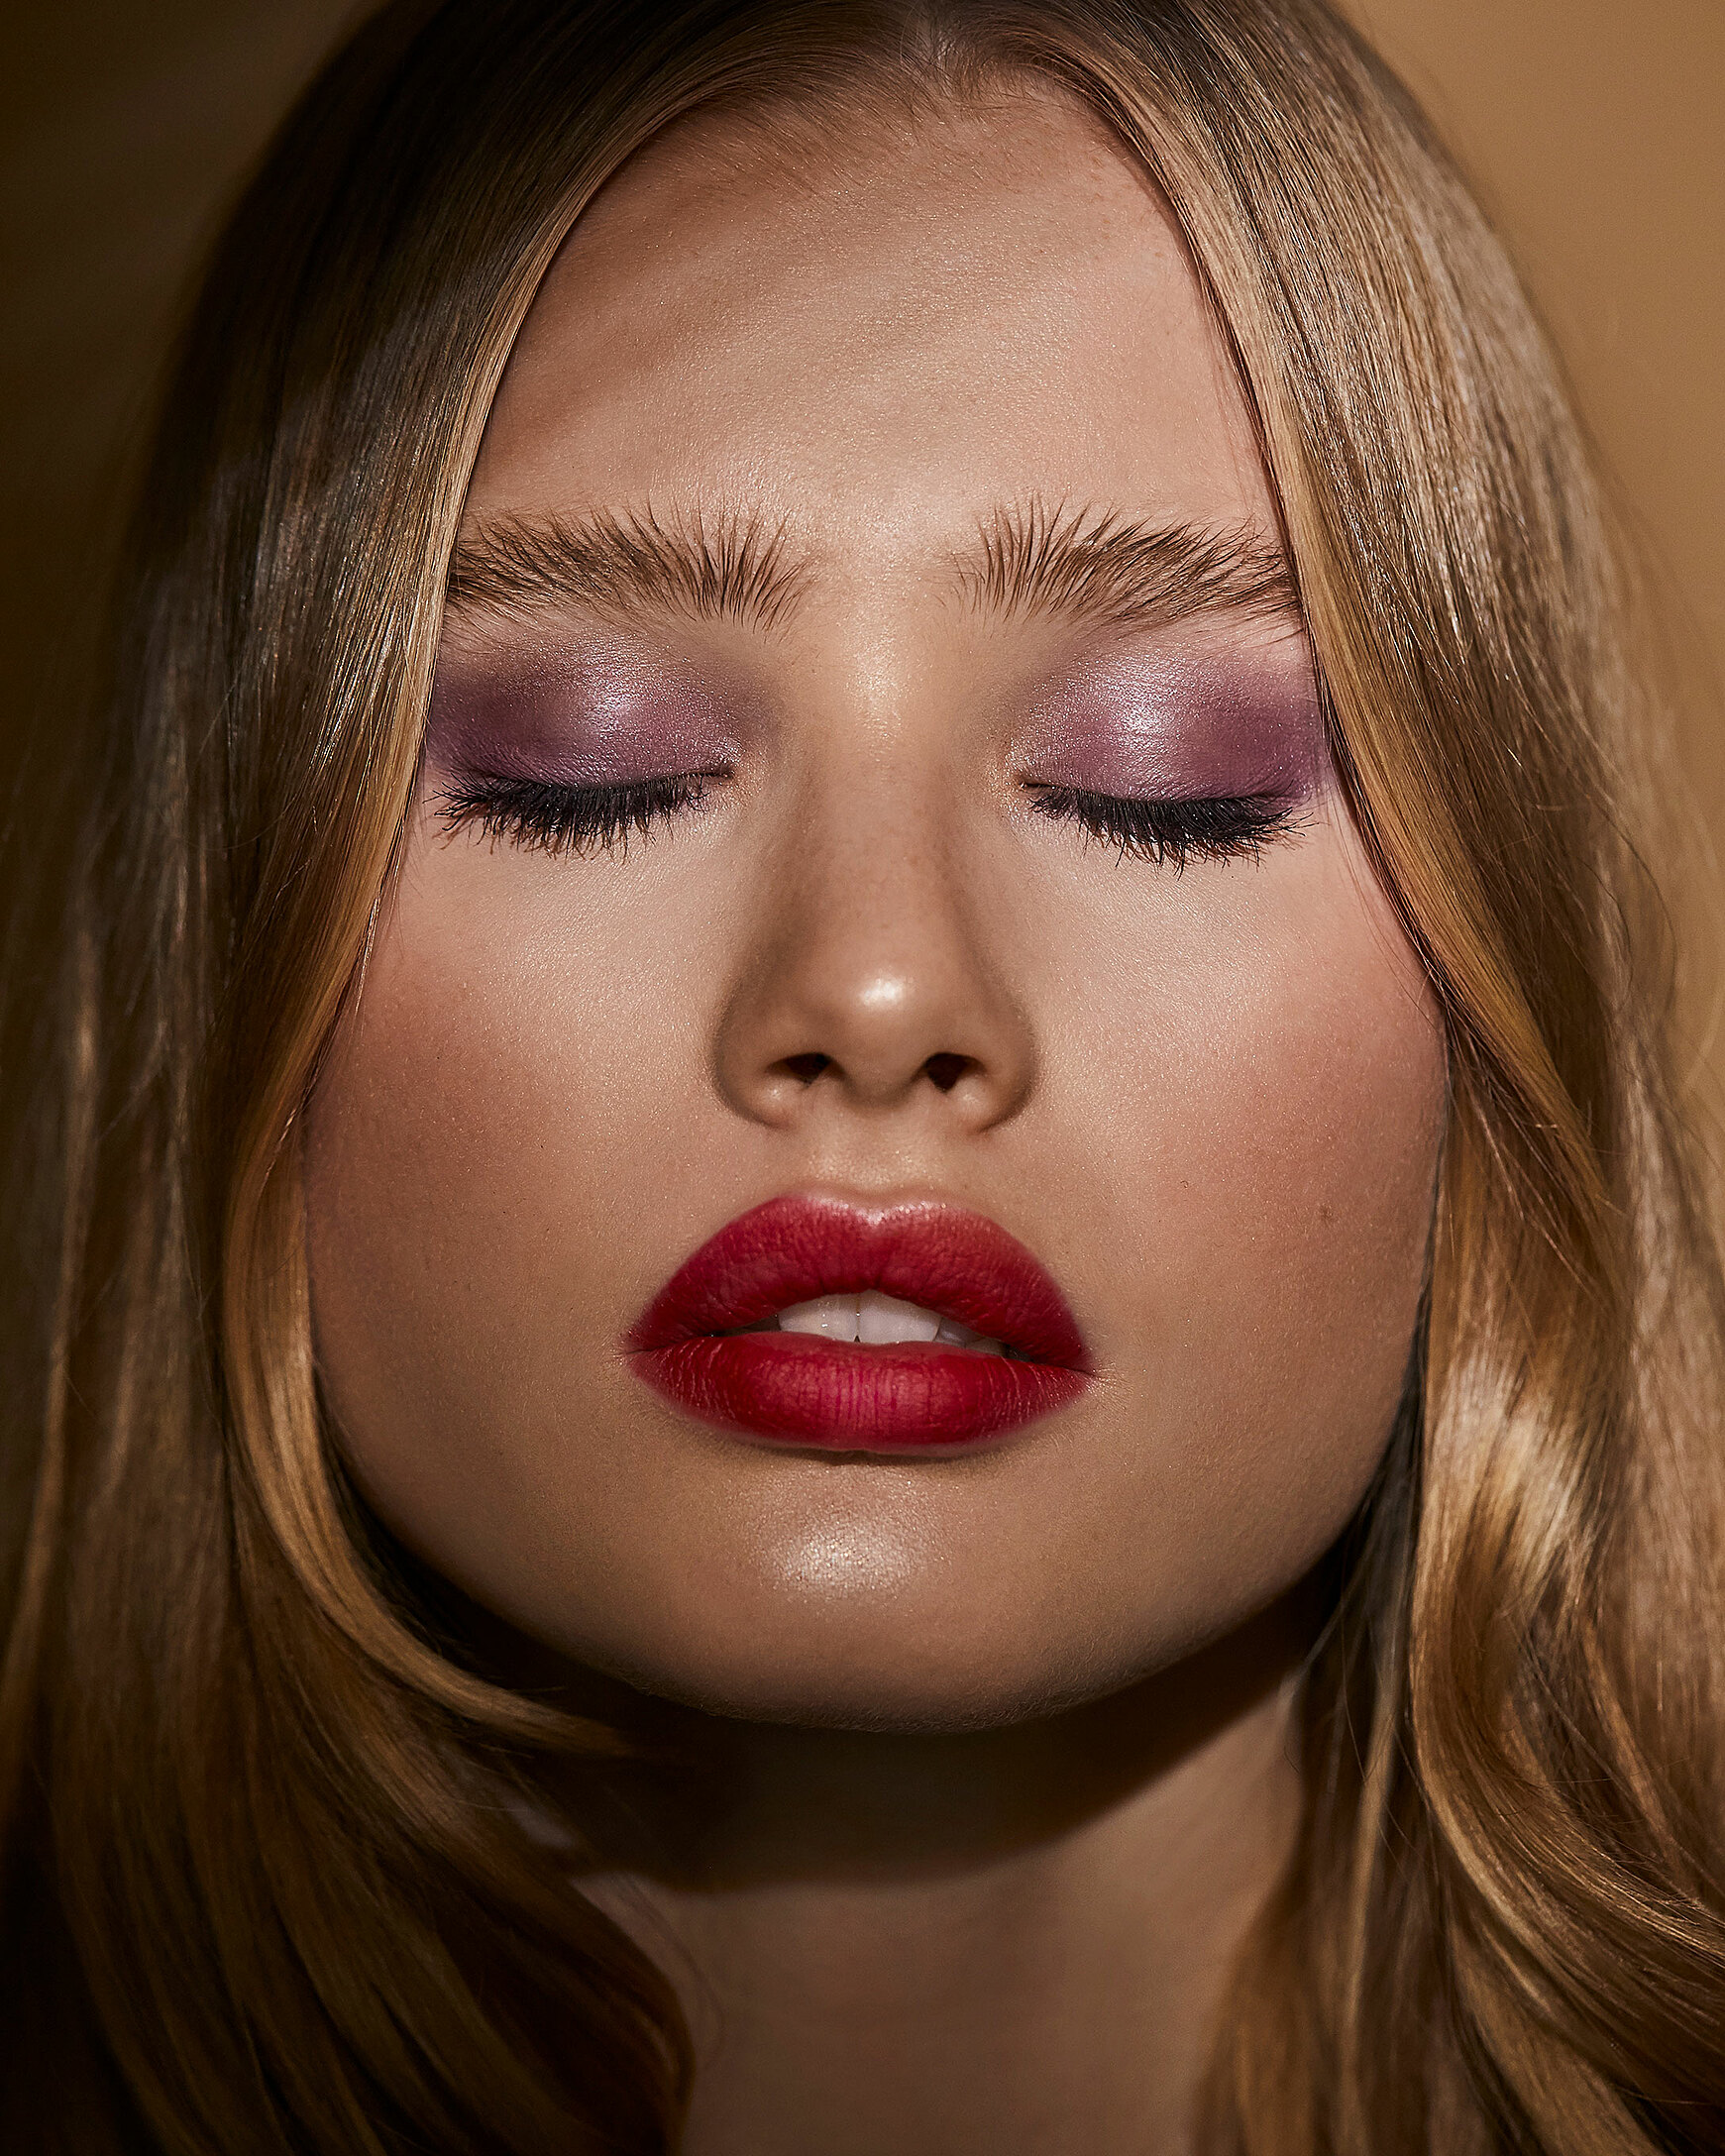 A close-up of a blonde female model closed her eyes. A colorful makeup with red lips and purple eye shadow